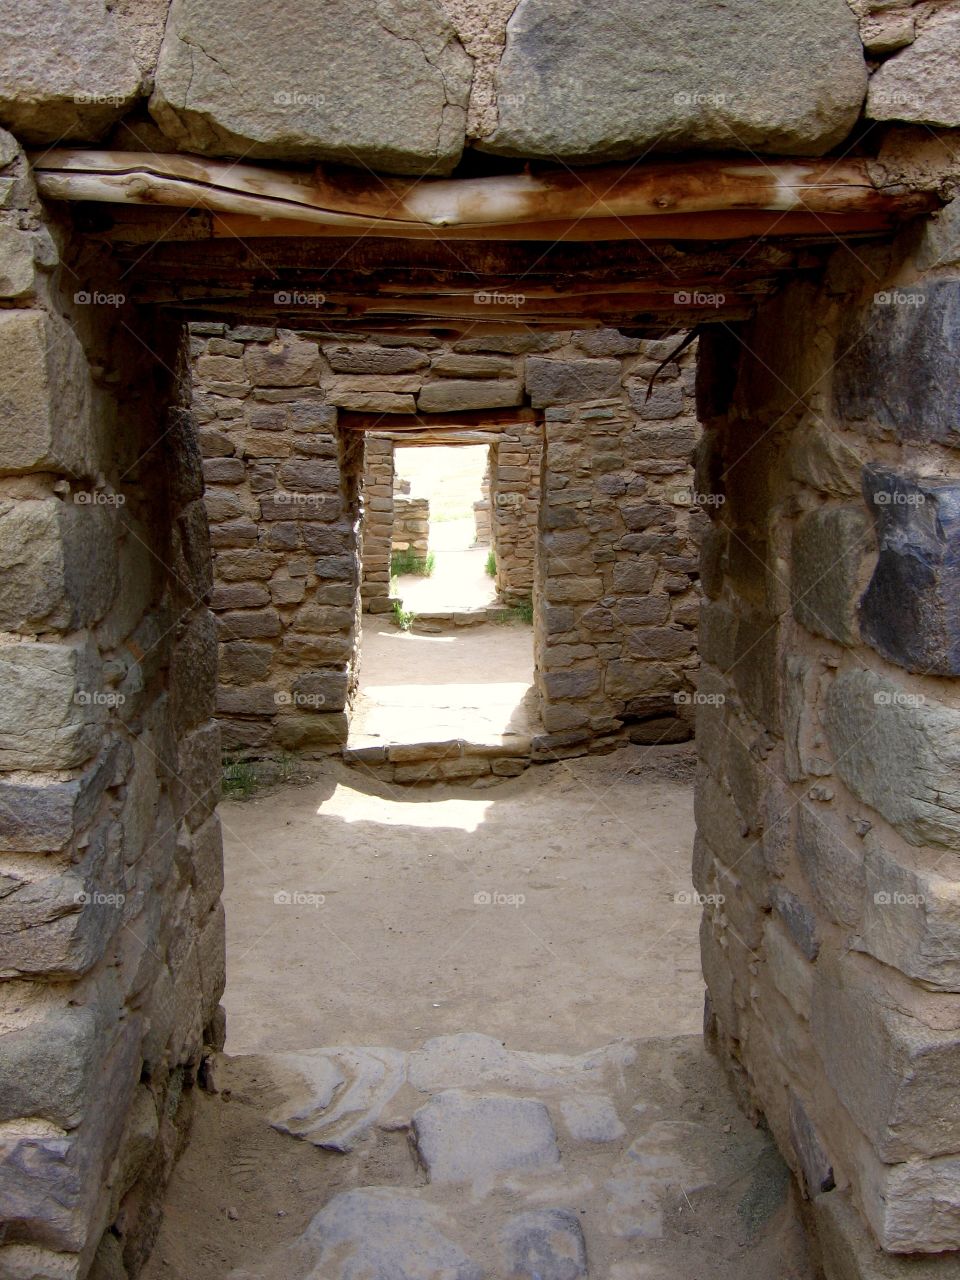 Doorways in the ruins, Aztec National Monument, New Mexico 